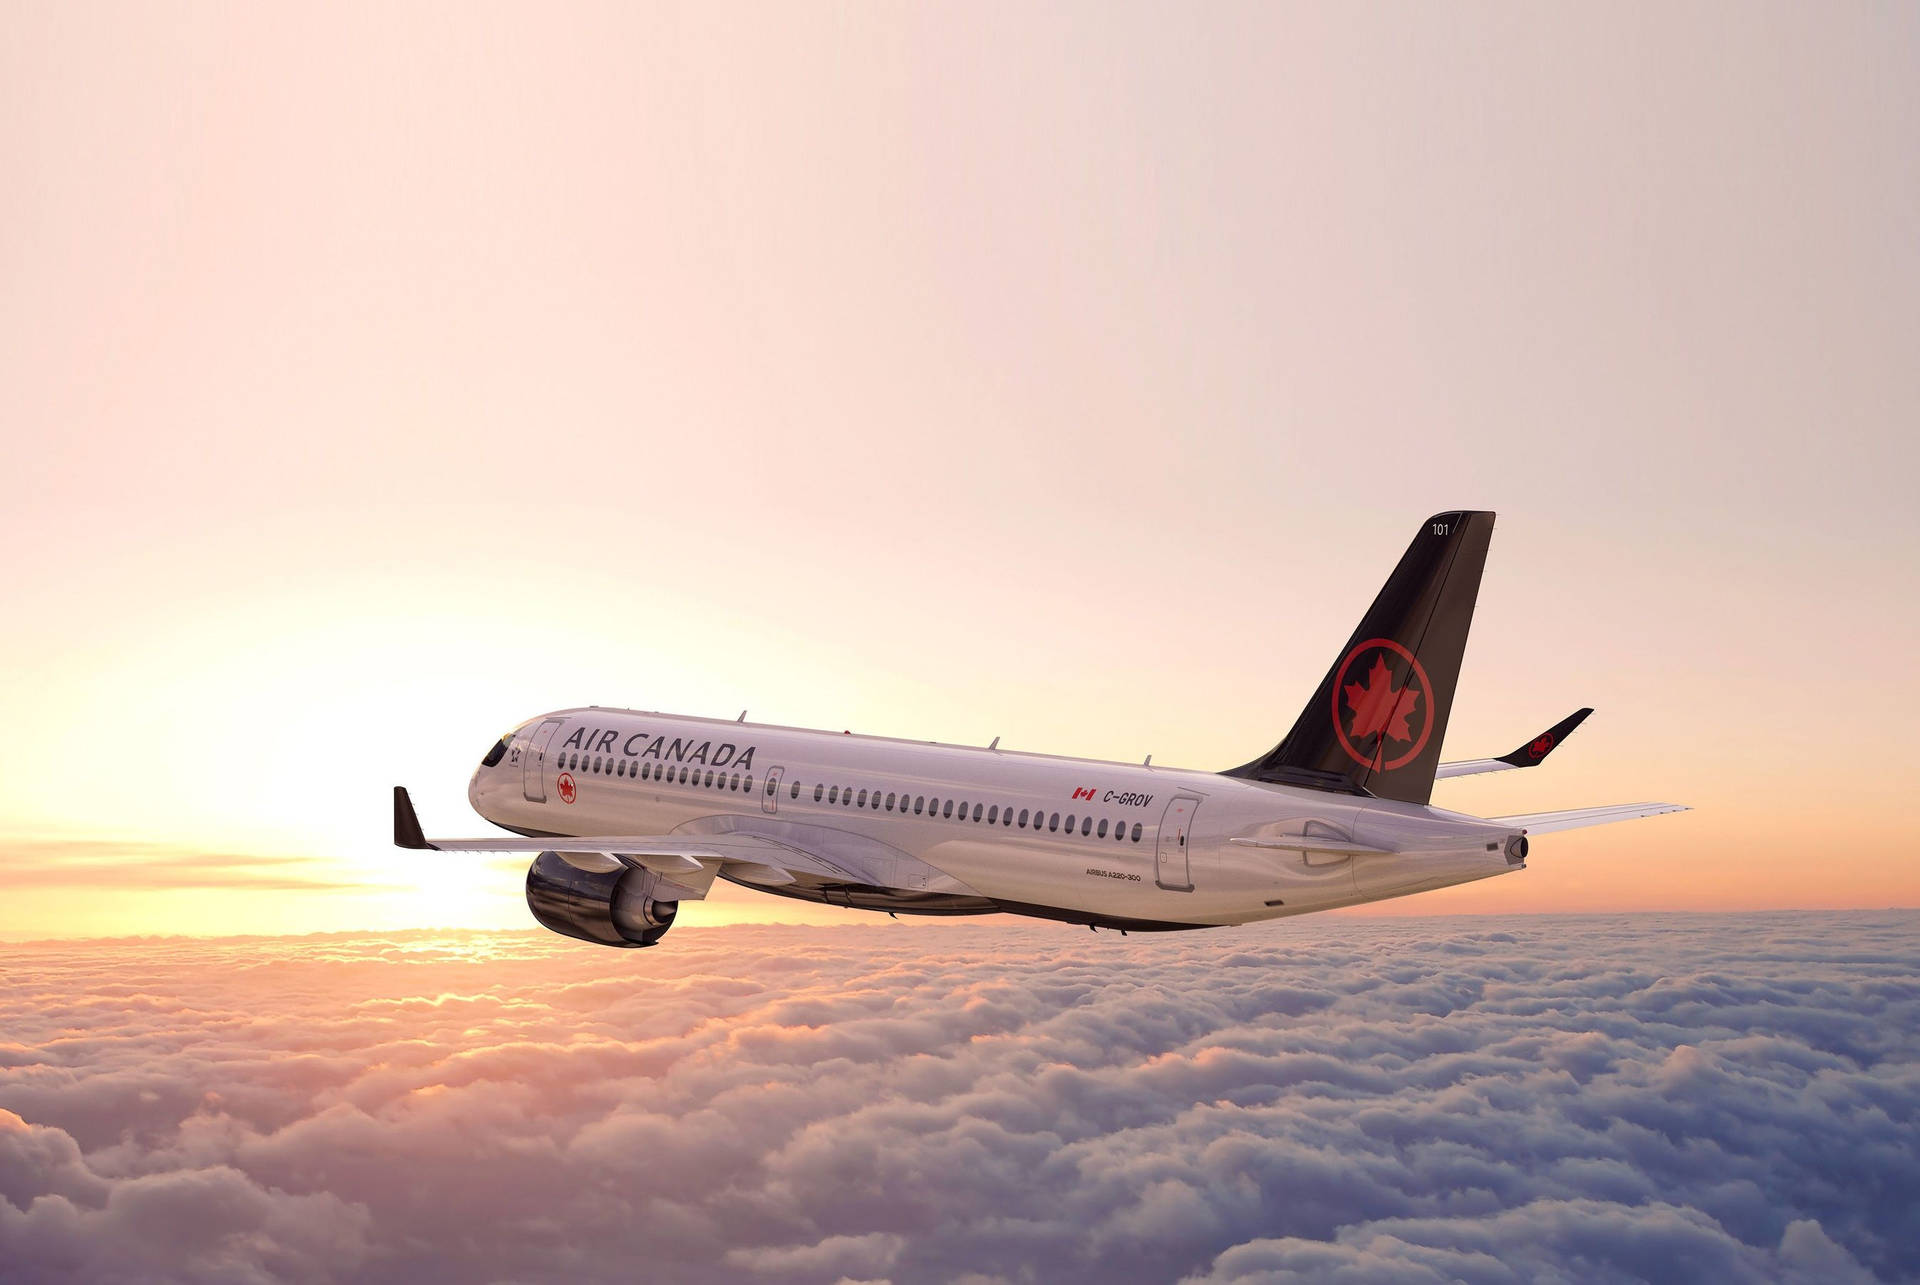 Air Canada Plane Over The Thick Clouds Wallpaper